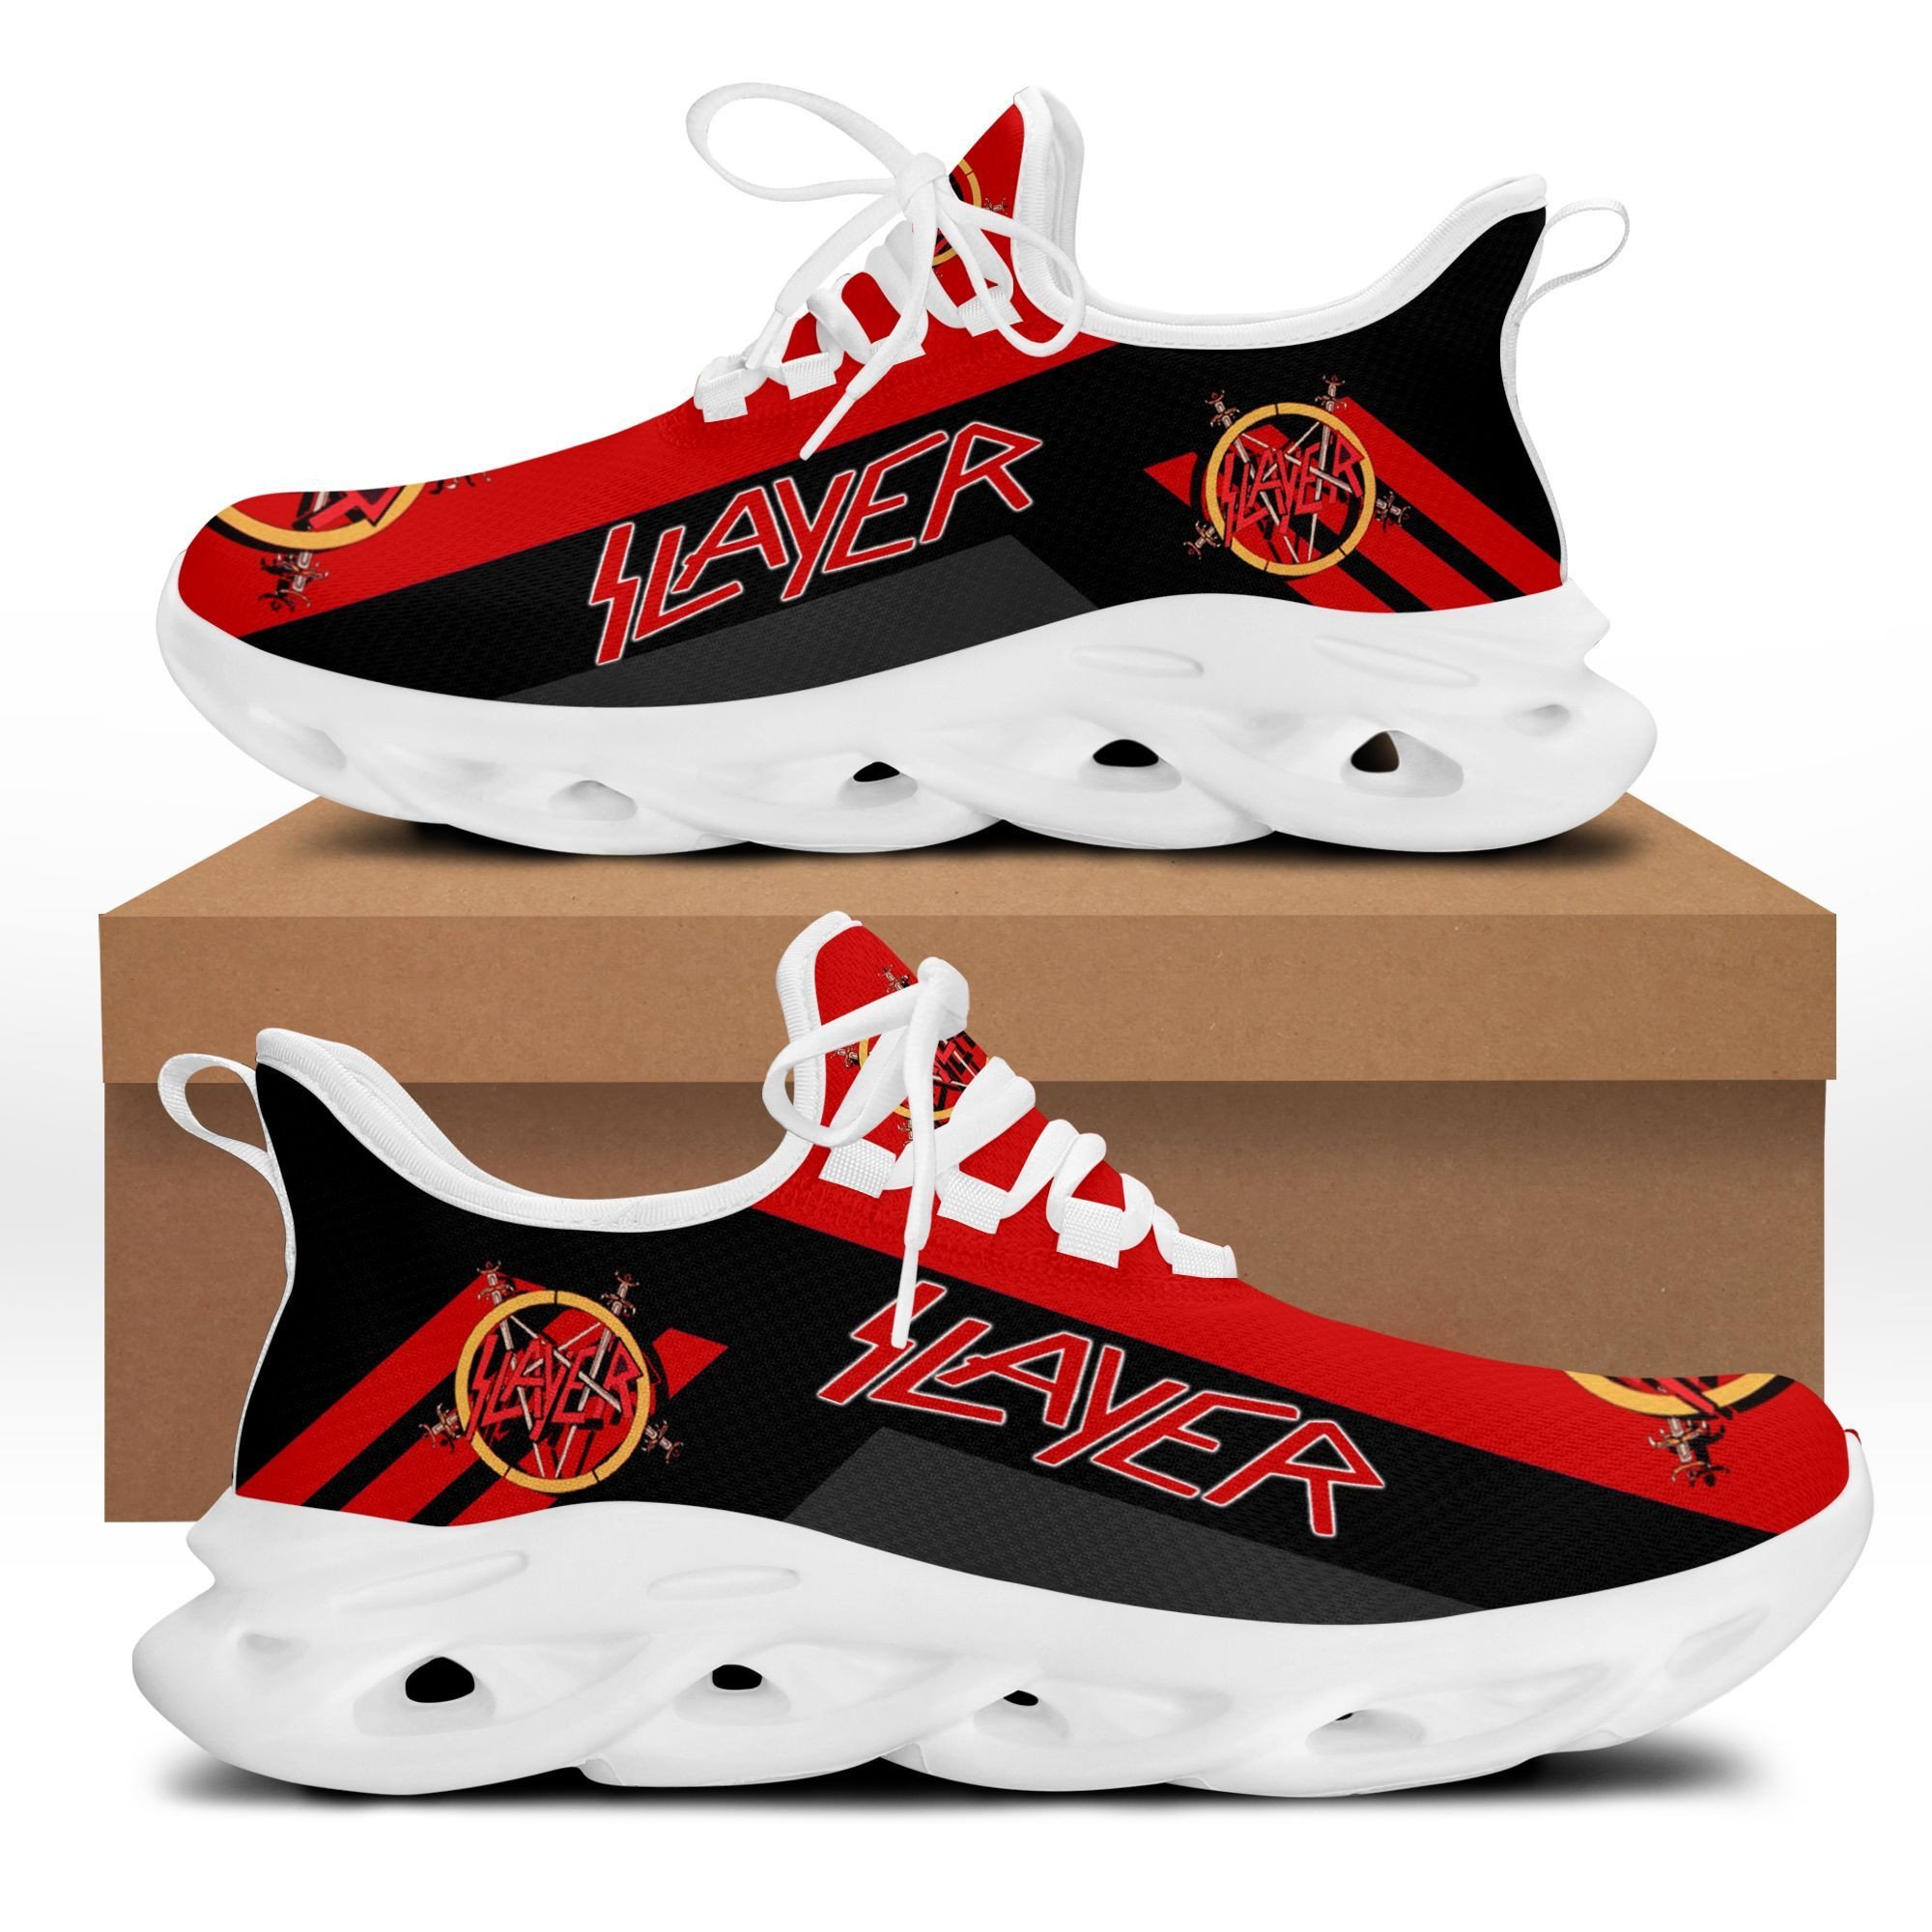 HOT Raining Blood Slayer Clunky Max soul Shoes 4